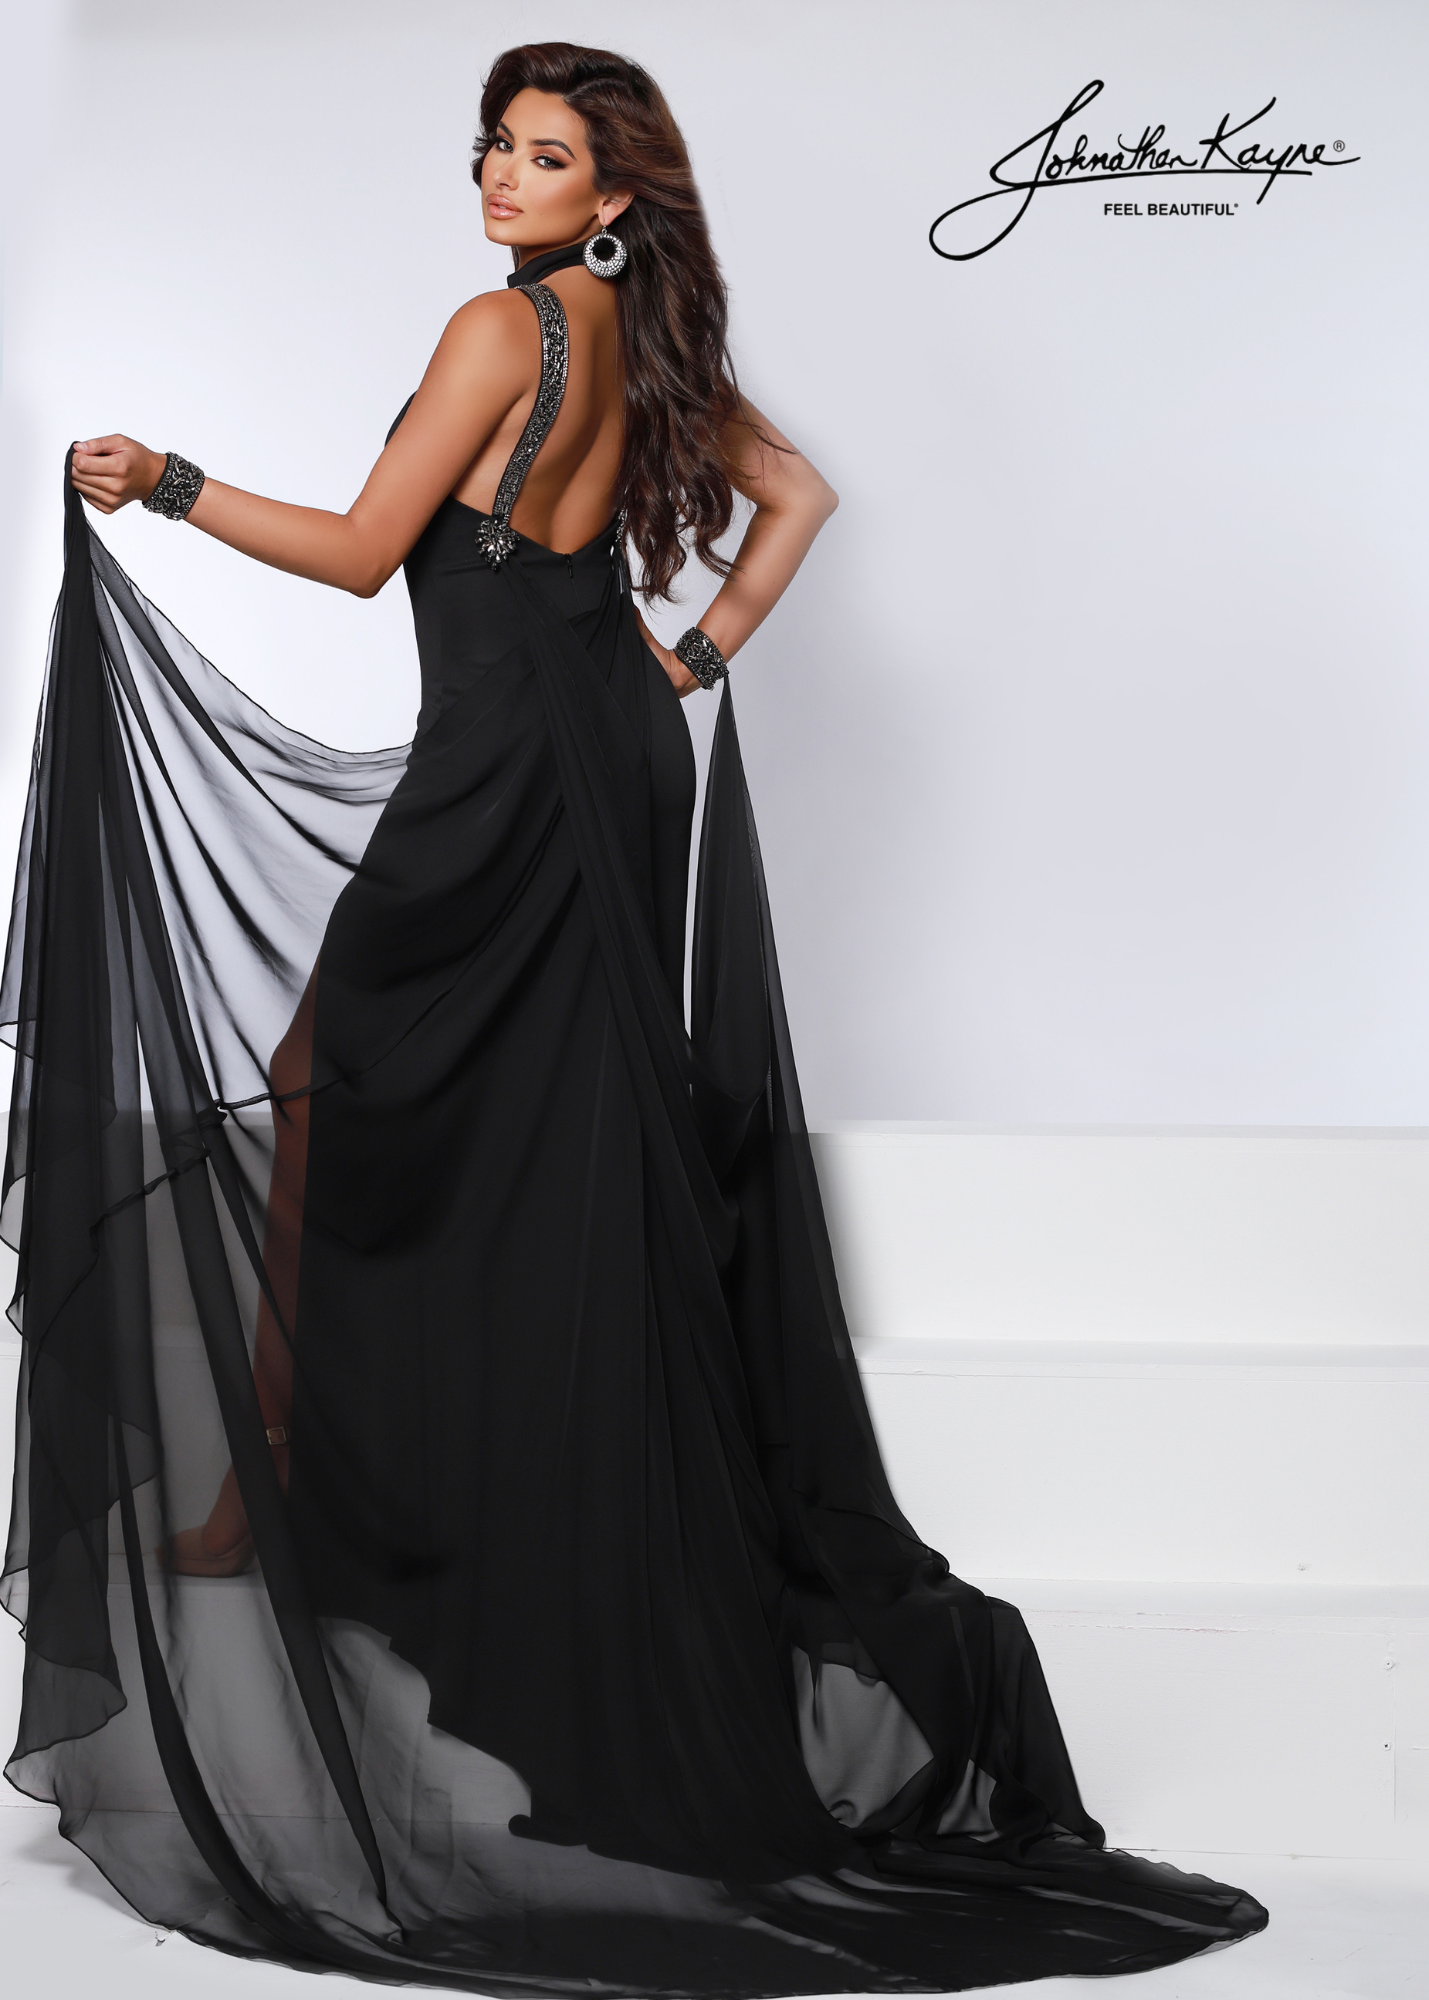 Be a showstopper in this Johnathan Kayne 2617 long slit formal dress! Featuring a breathtaking crystal cuff cape, this pageant gown offers the perfect combination of luxury and glamor for special occasions. Get ready to make a statement and turn heads! #runwayready Look divine in this classy heavy knit beauty! The beaded collar and straps is accompanied by a detachable flowing poly chiffon cape with beaded wrist cuffs.  Colors: Royal, Black, White, Red  Sizes: 00-18